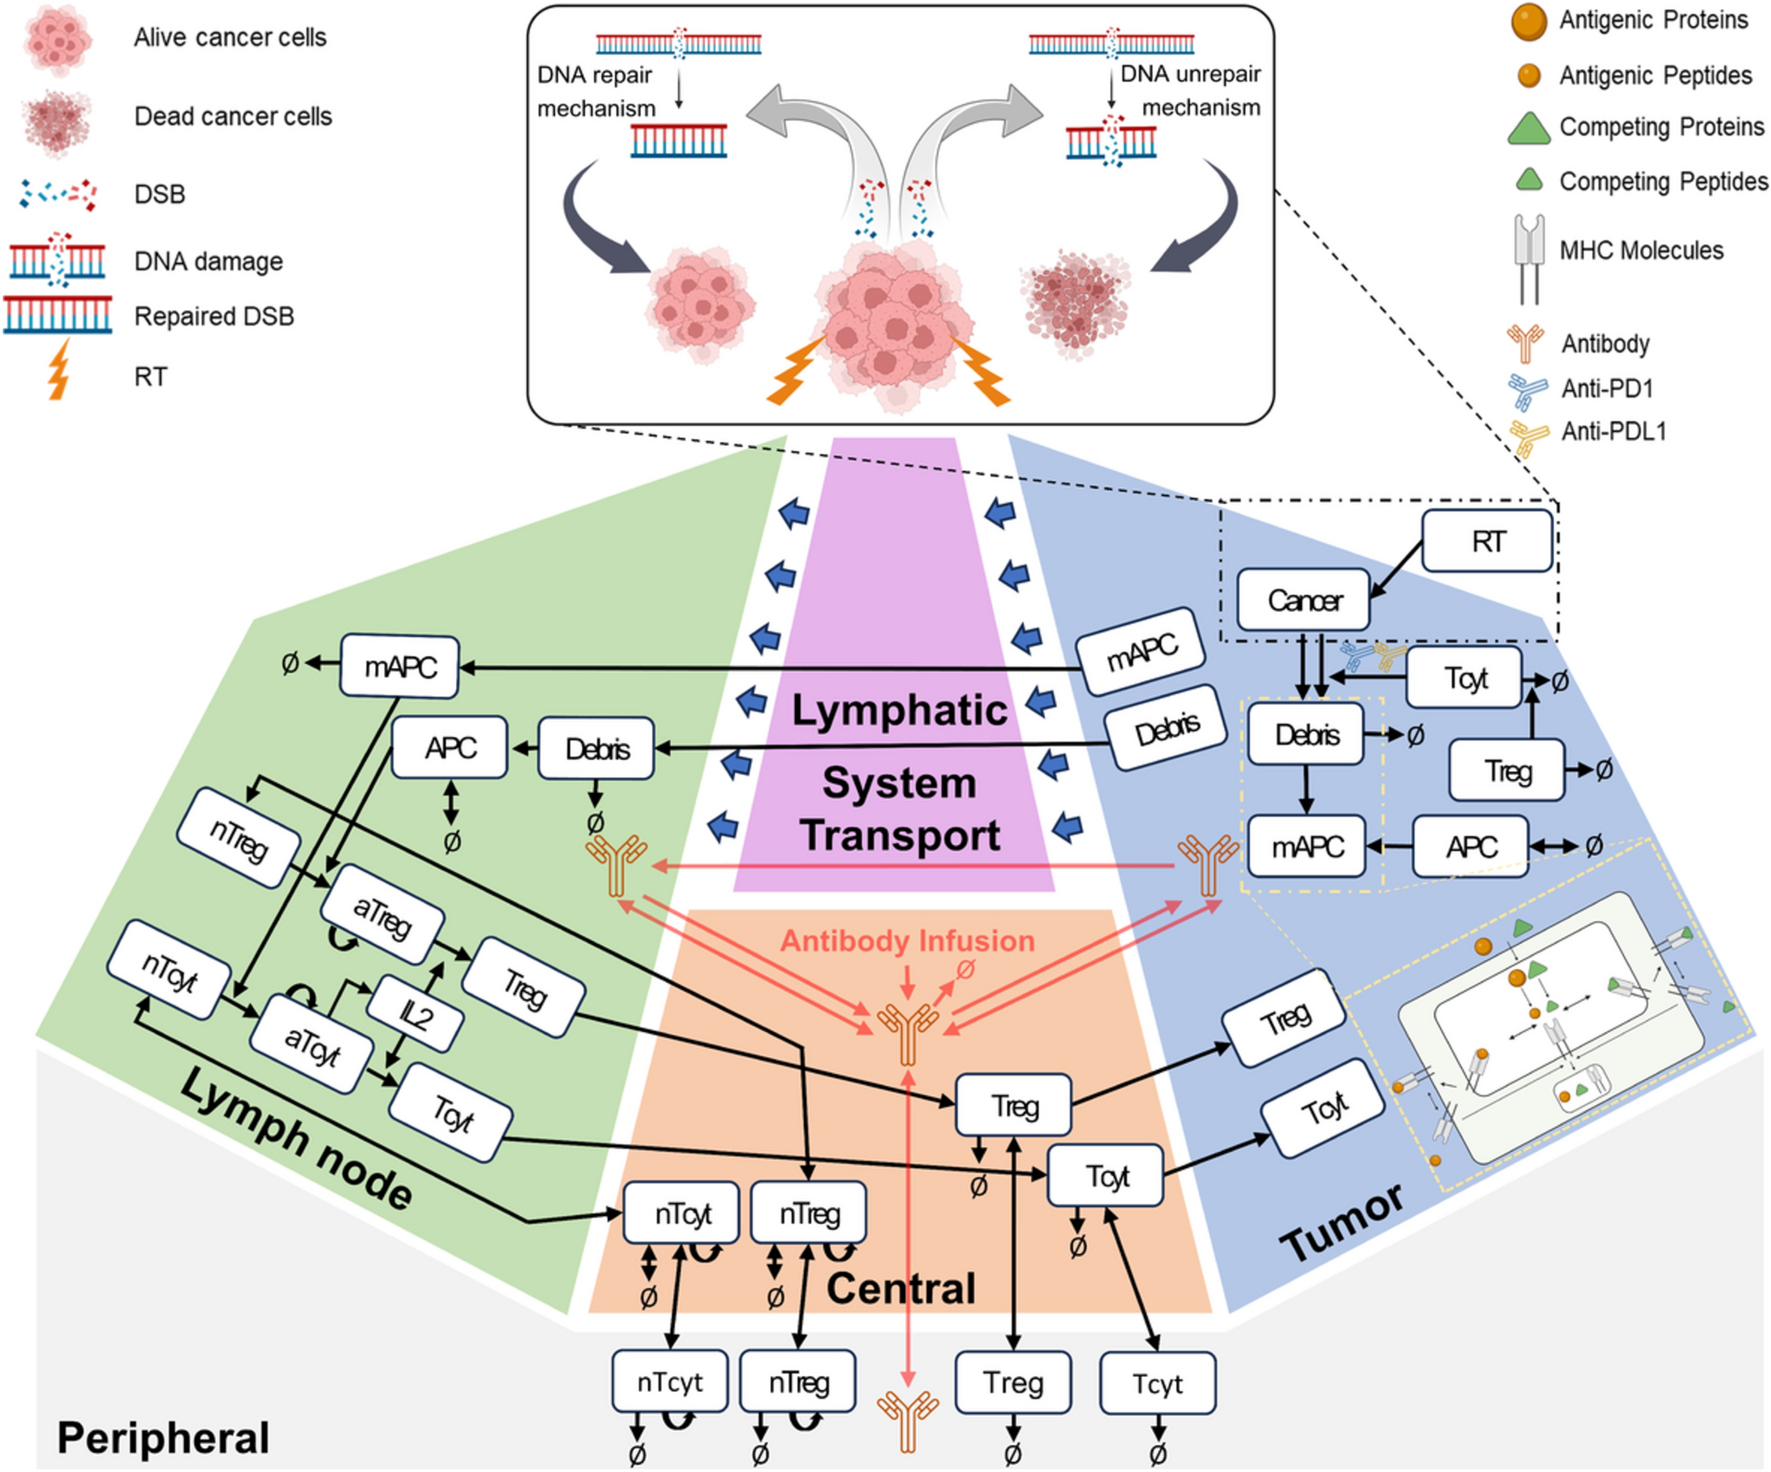 Predicting efficacy assessment of combined treatment of radiotherapy and nivolumab for NSCLC patients through virtual clinical trials using QSP modeling